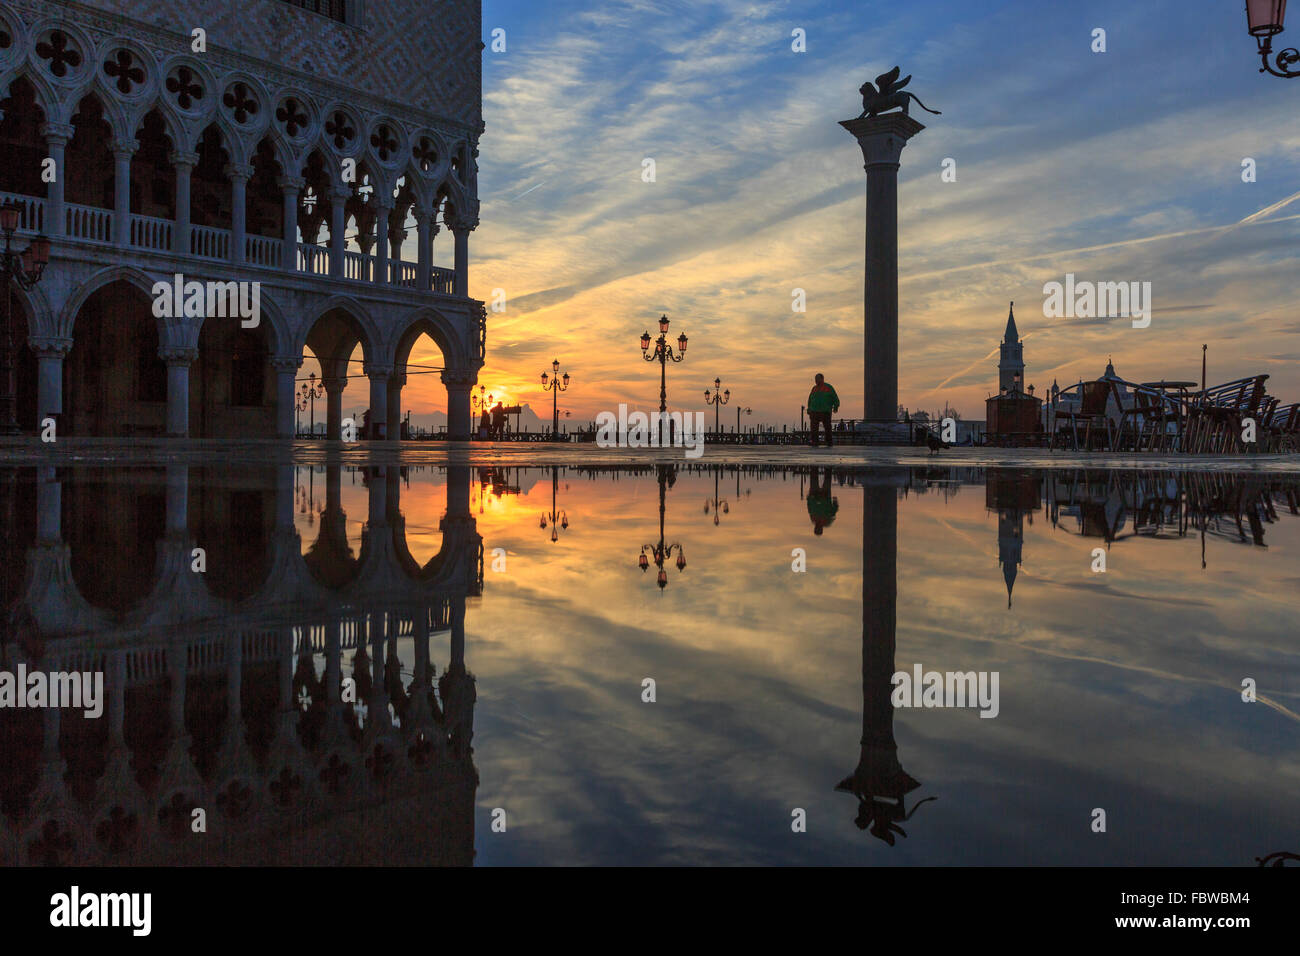 Flood, Piazzetta and the Doge's Palace, Venice, Italy Stock Photo